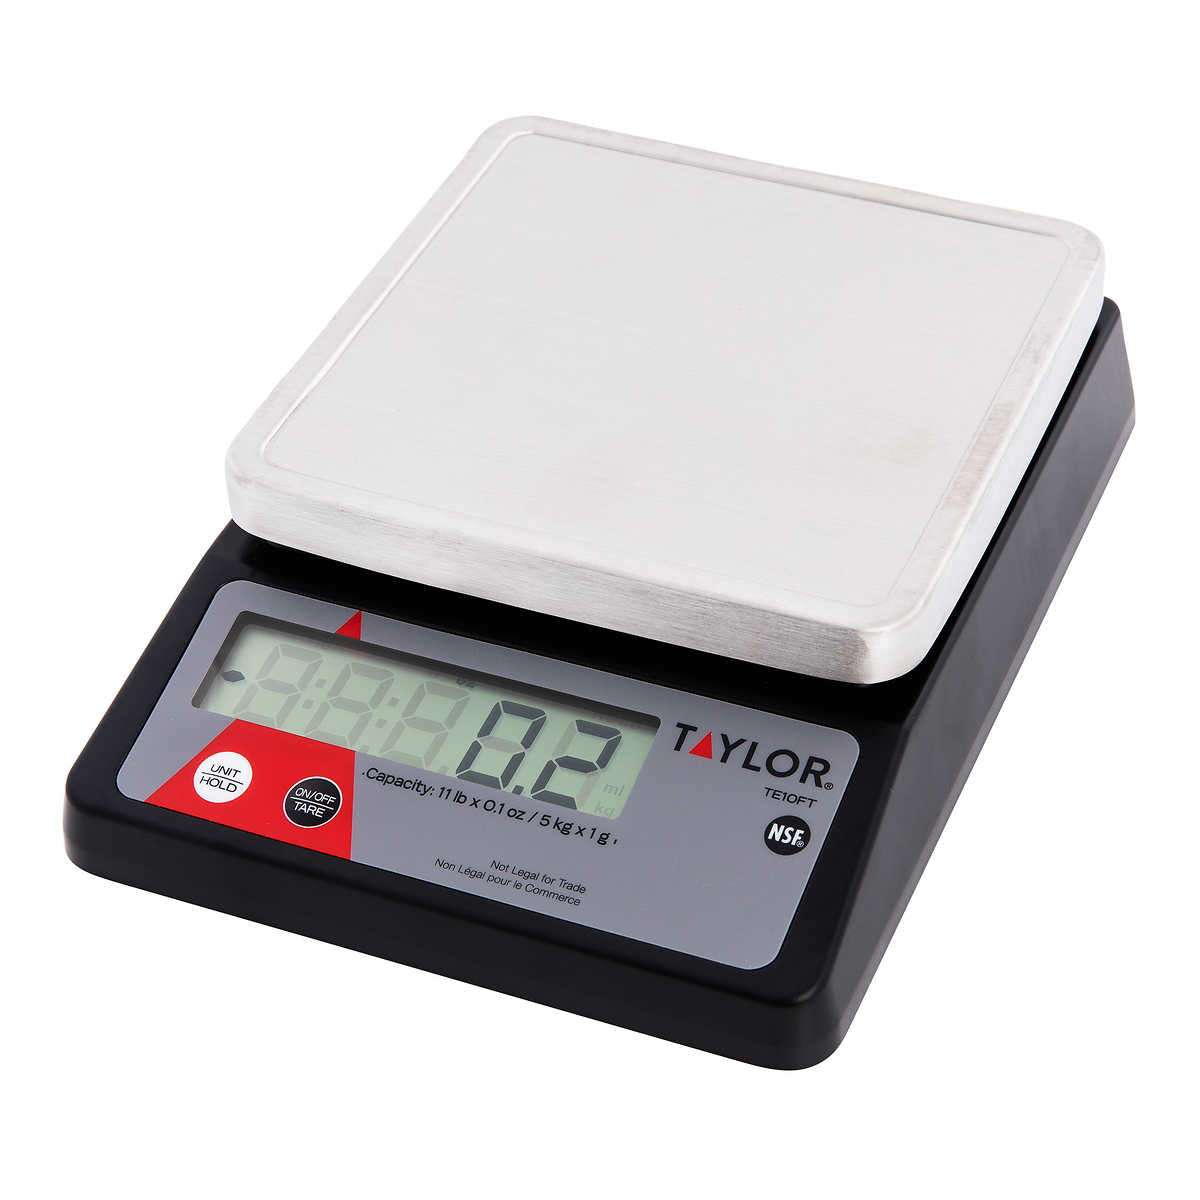 Taylor Compact Digital Portion Scale